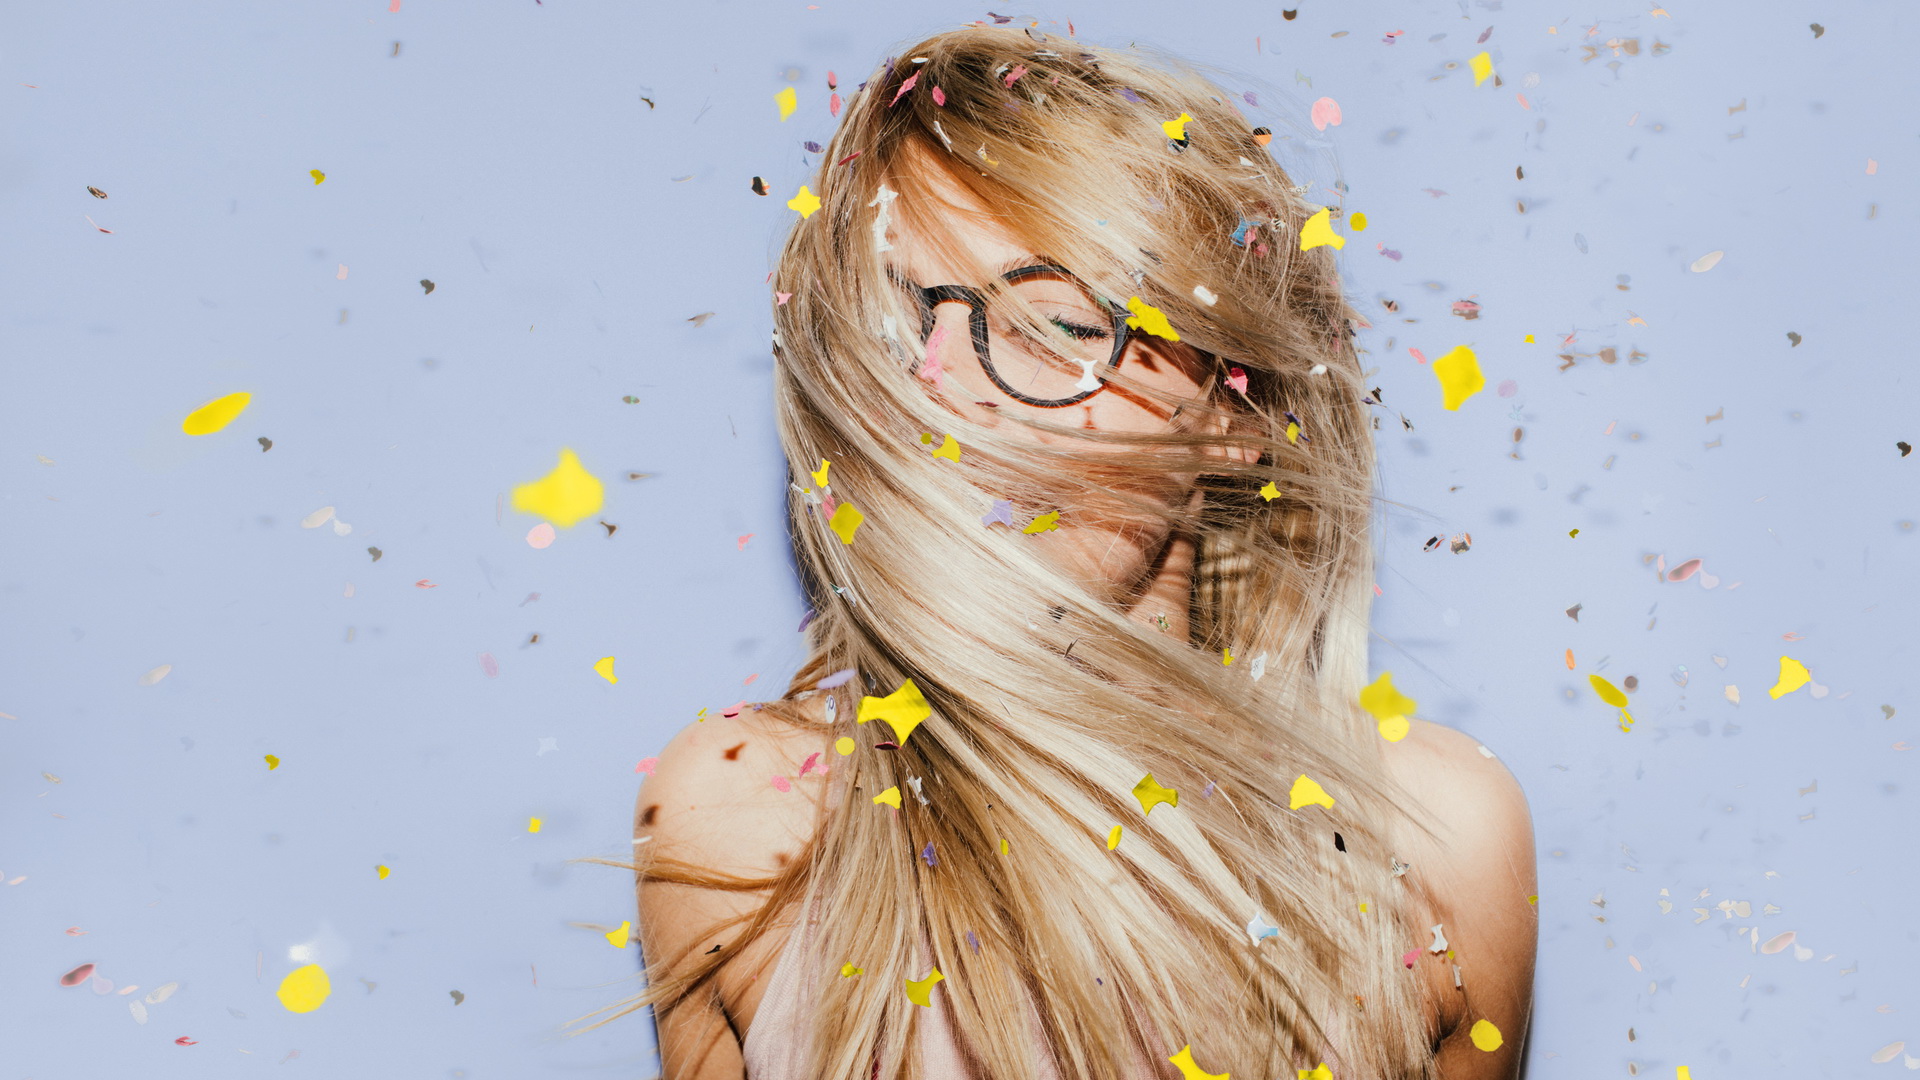 Photo of a young woman celebrating her youth, beauty and femininity - dancing while confetti are falling